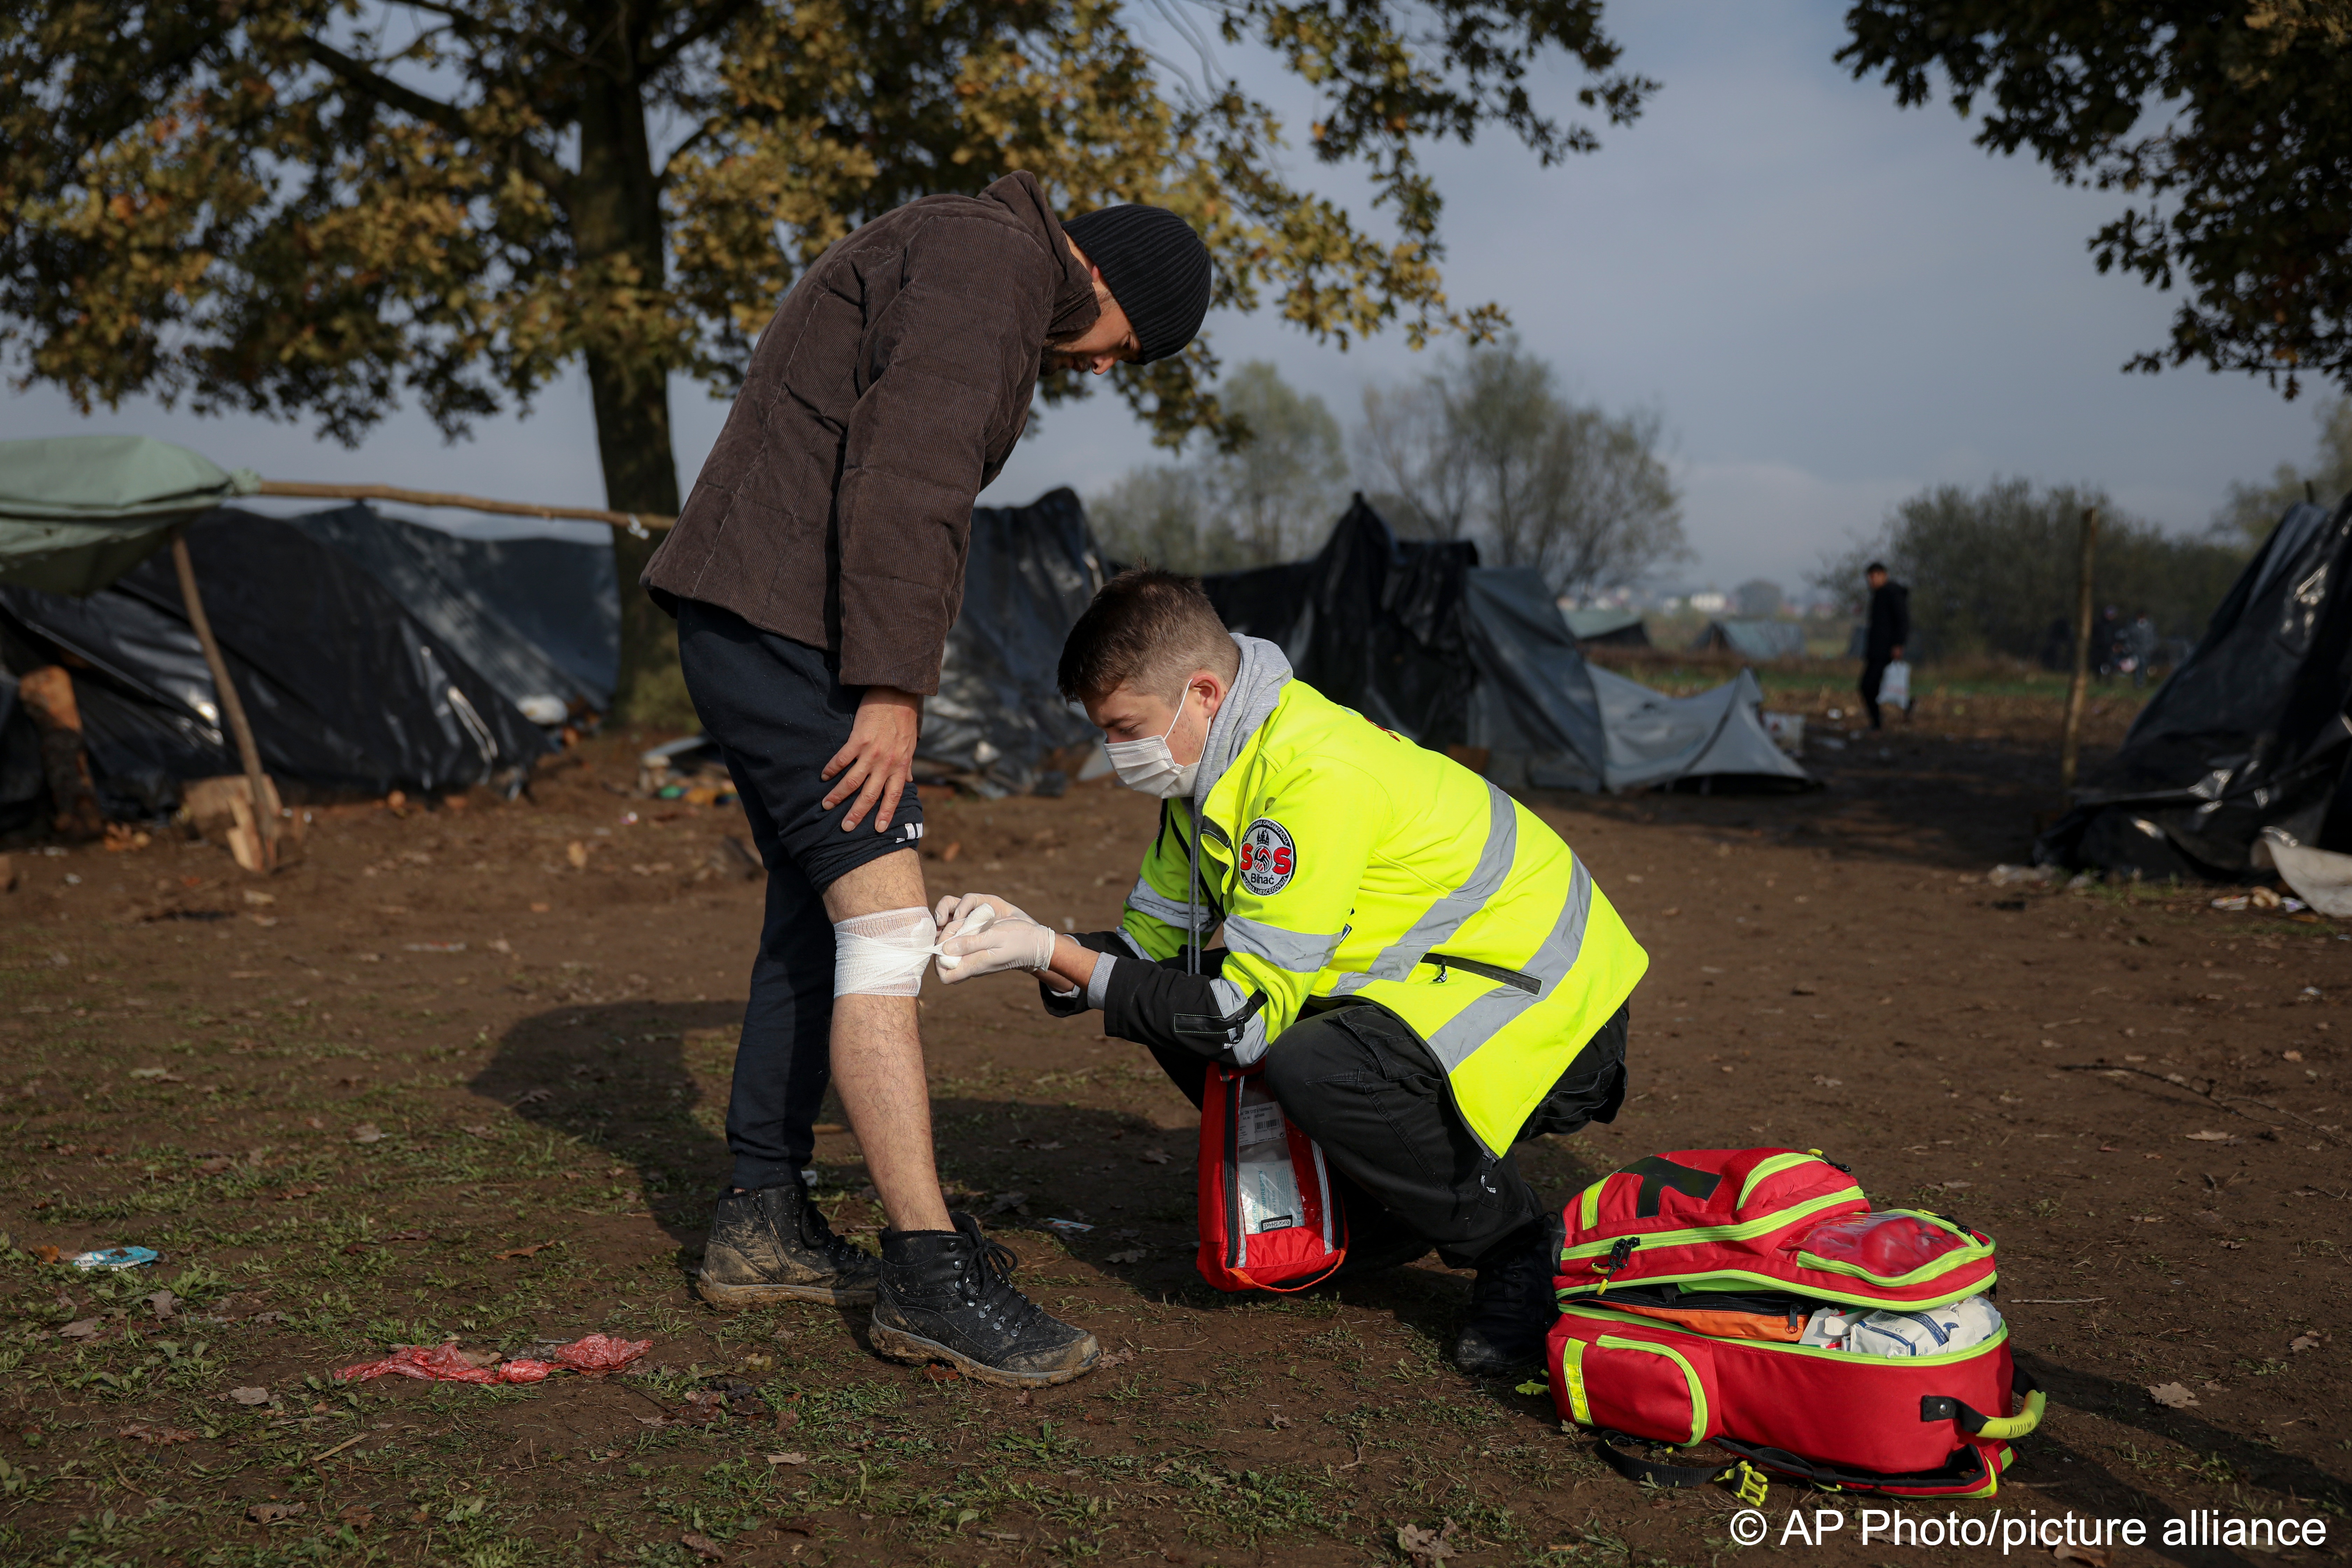 A volunteer of the SOS Bihac NGO looks after an injured migrant at a makeshift camp housing migrants mostly from Afghanistan, in Velika Kladusa, Bosnia, 12 October 2021 (photo: AP Photo)